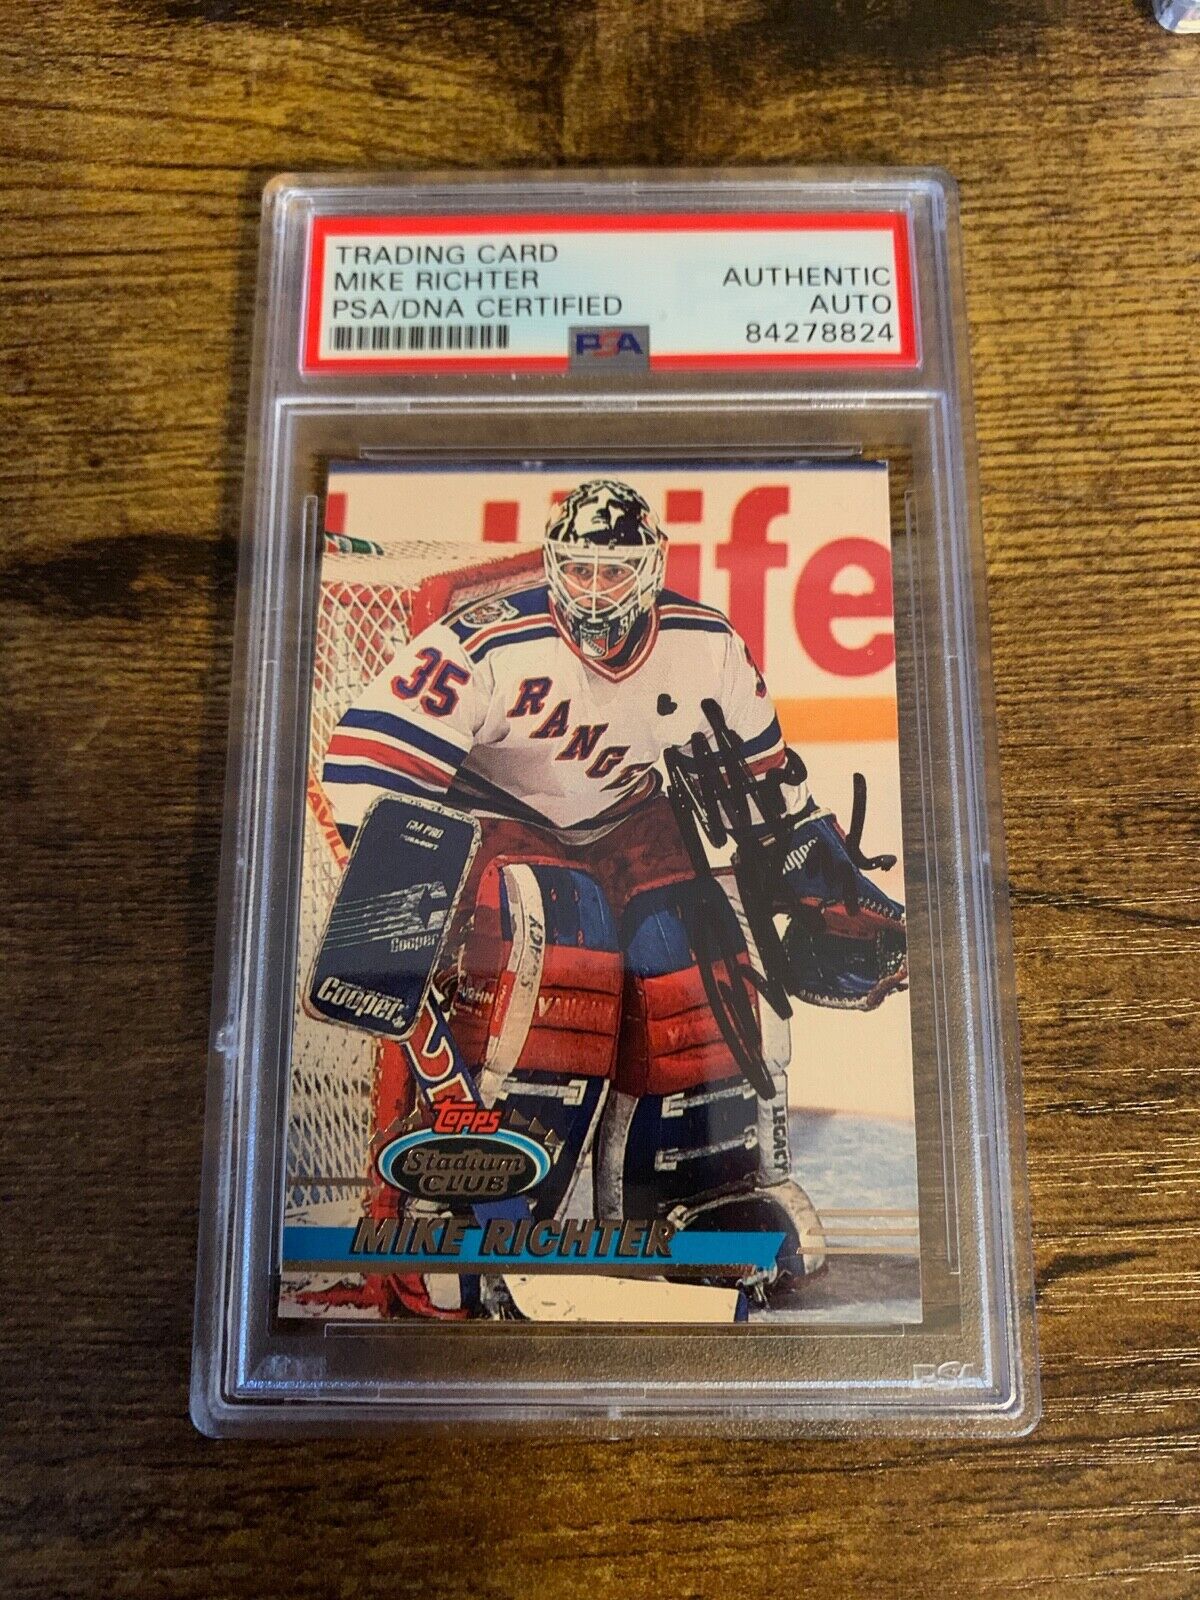 Mike Richter Autographed 1991/92 Topps Stadium Club Card PSA Certified Slabbed